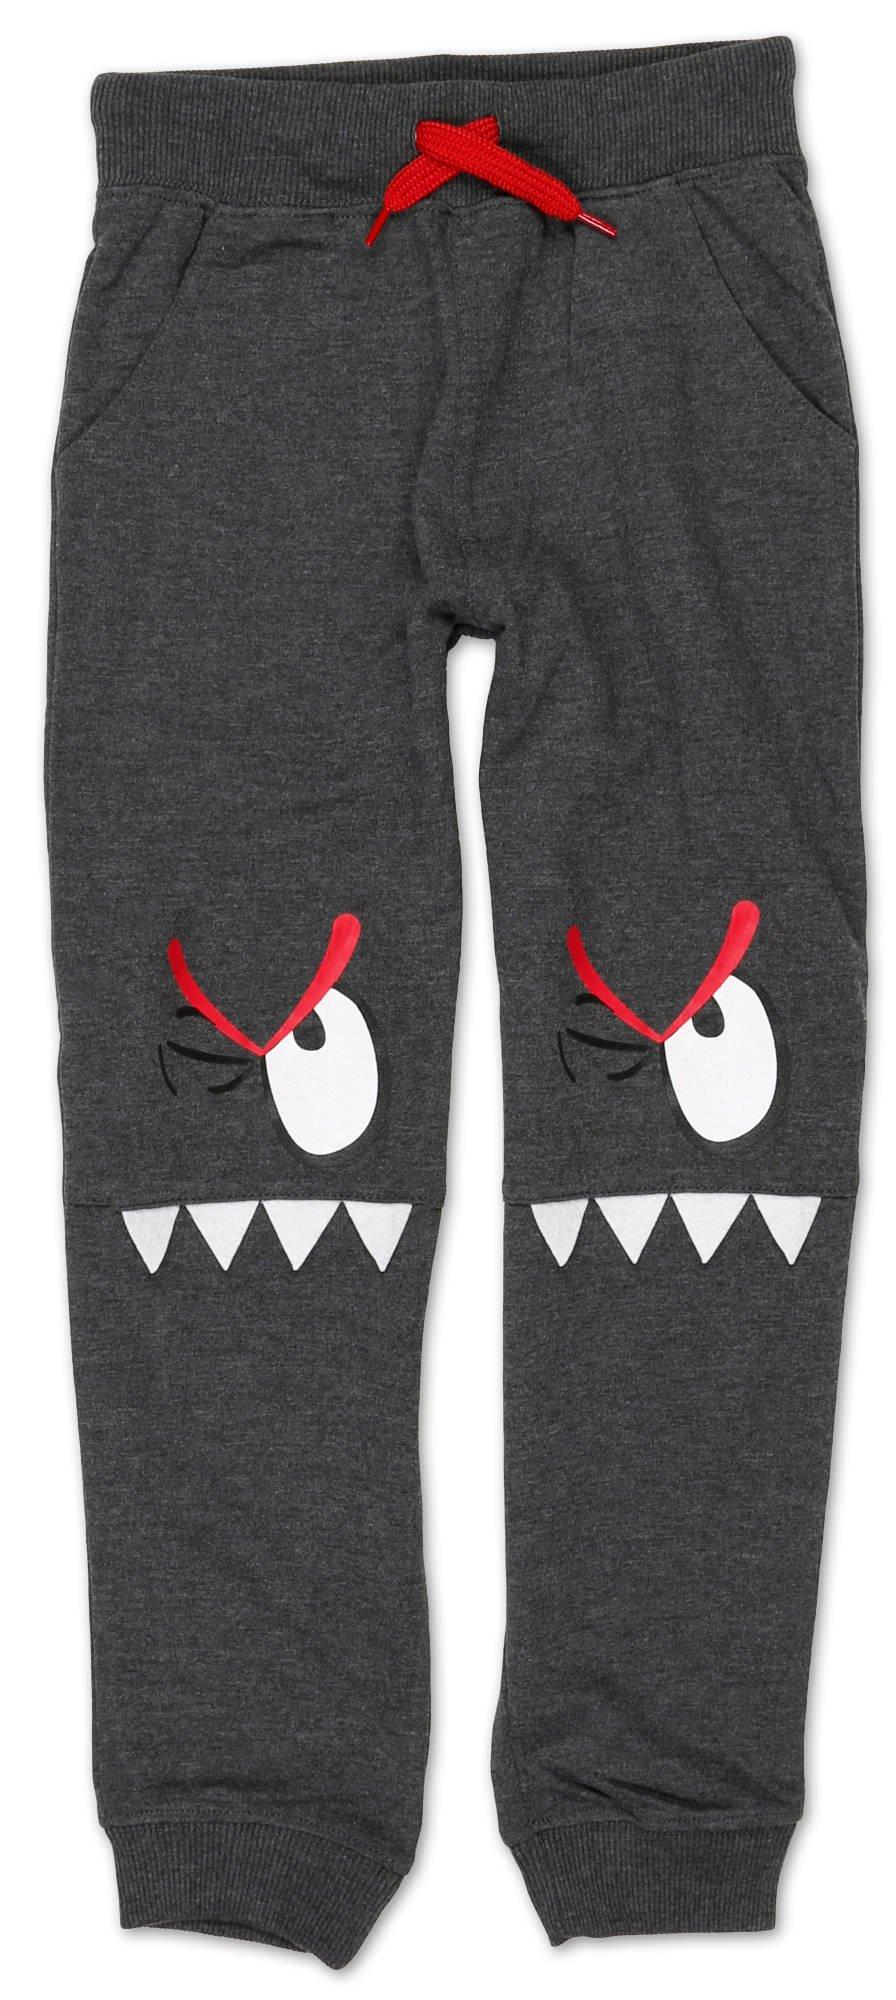 shorts with monster face